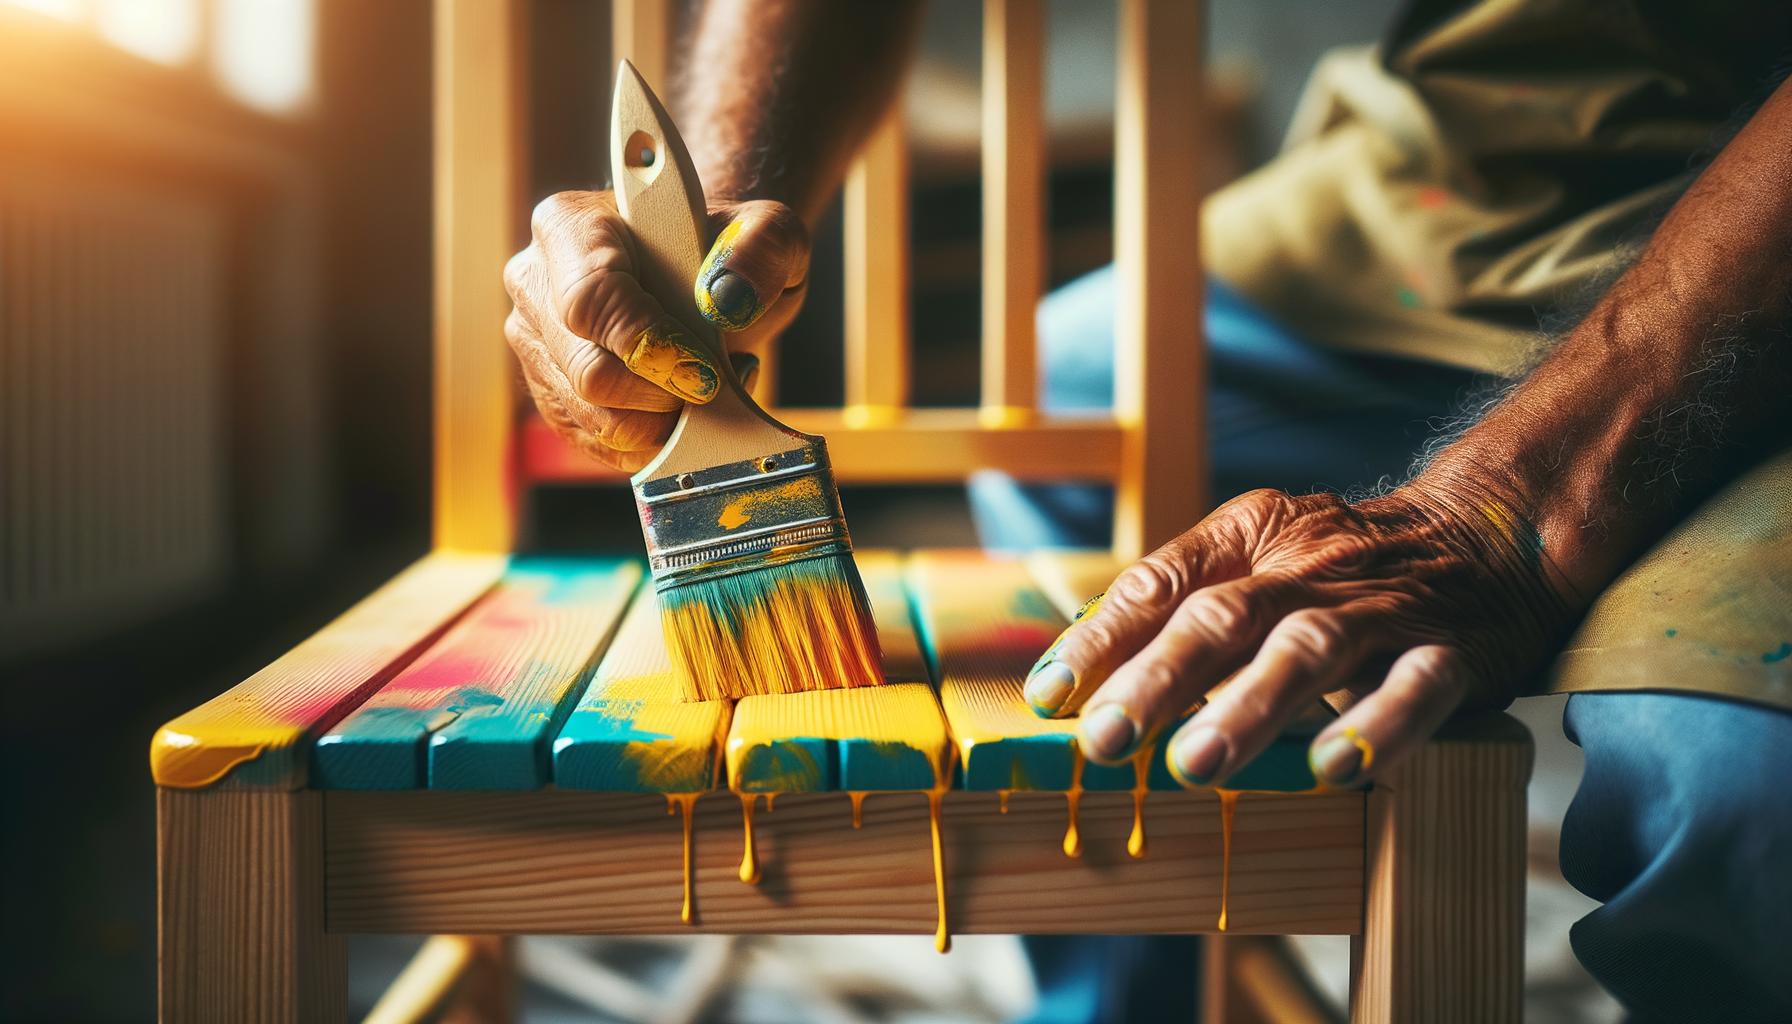 a hand painting a wooden chair in a bright, inviting color.